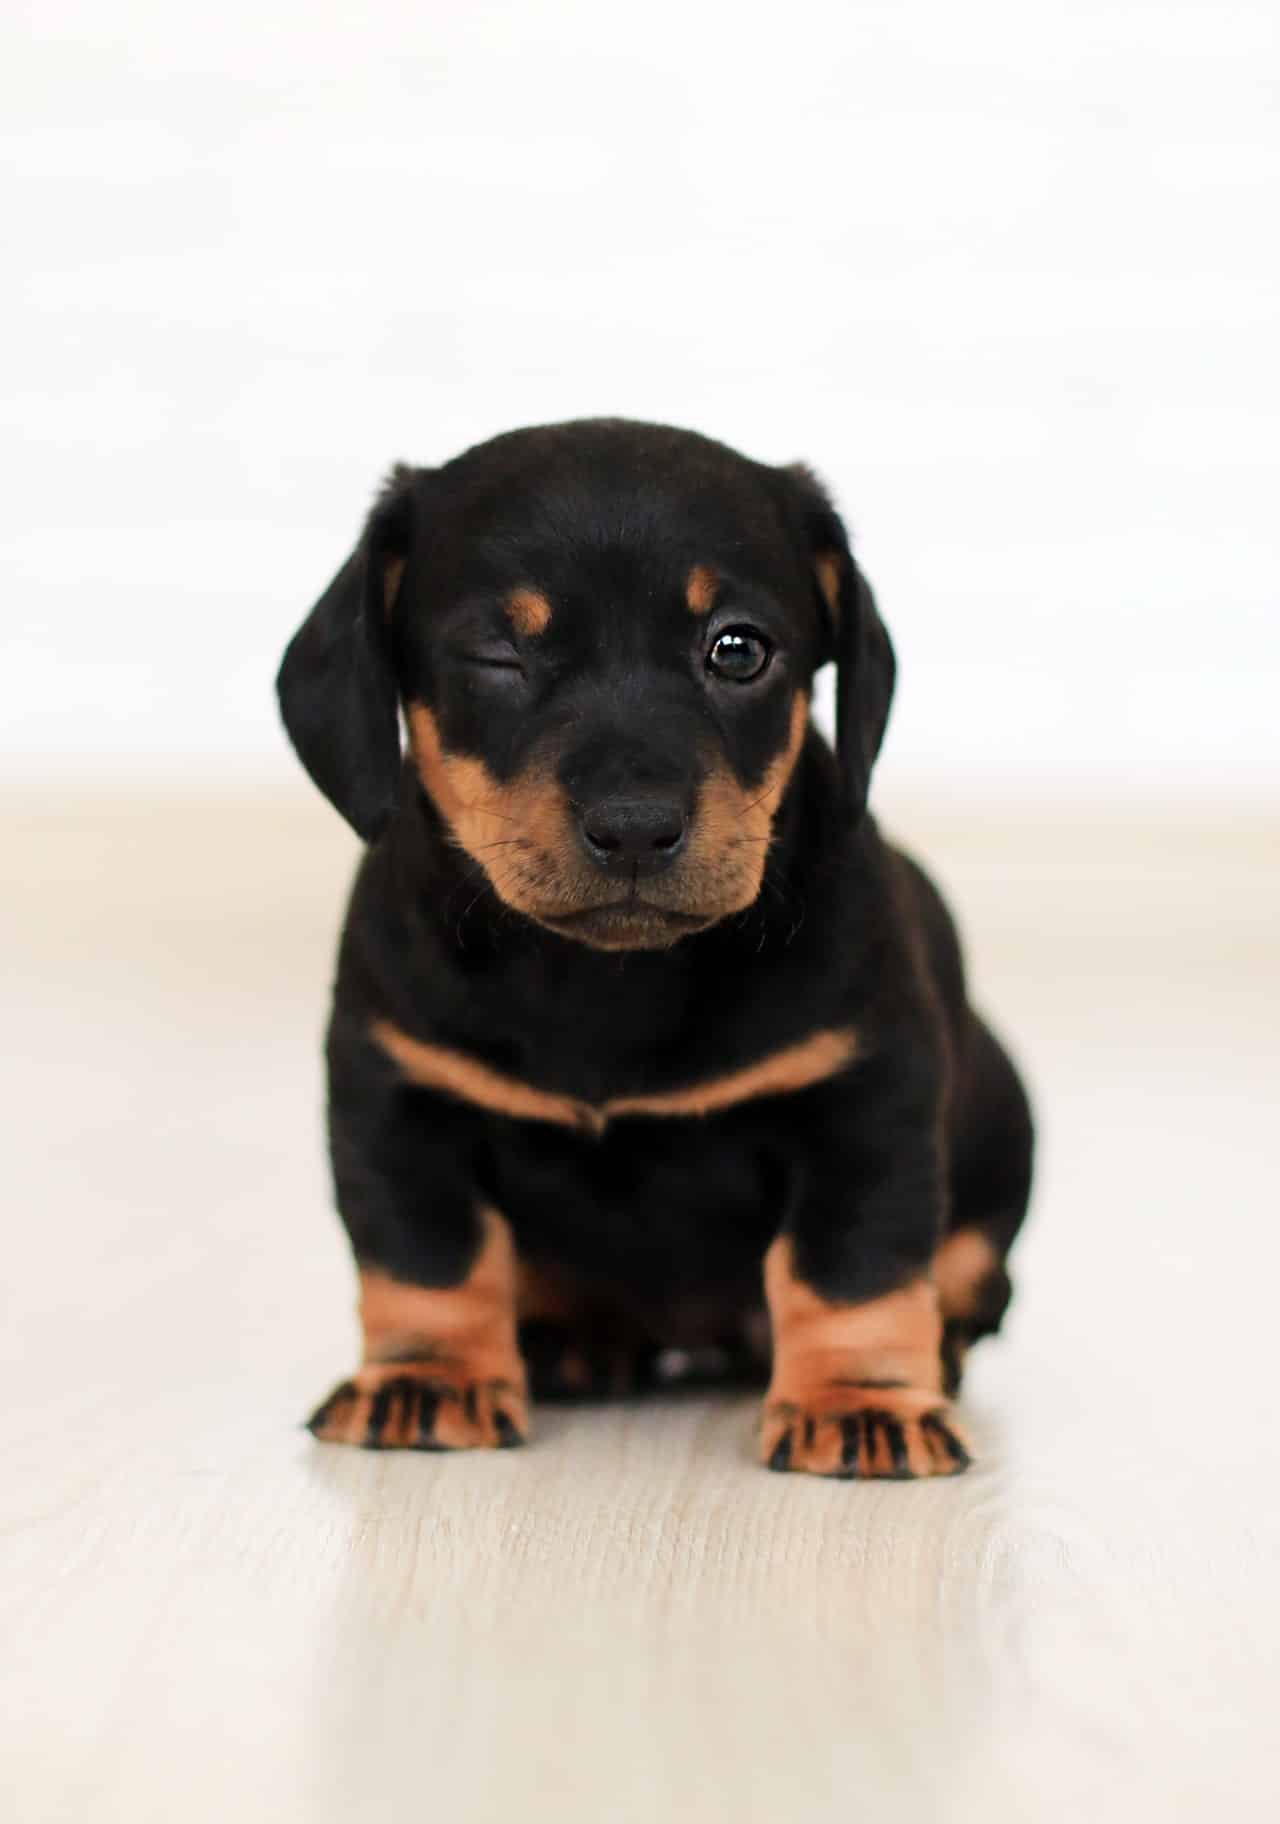 FREQUENTLY ASKED QUESTIONS BY PROSPECTIVE PUPPY BUYERS